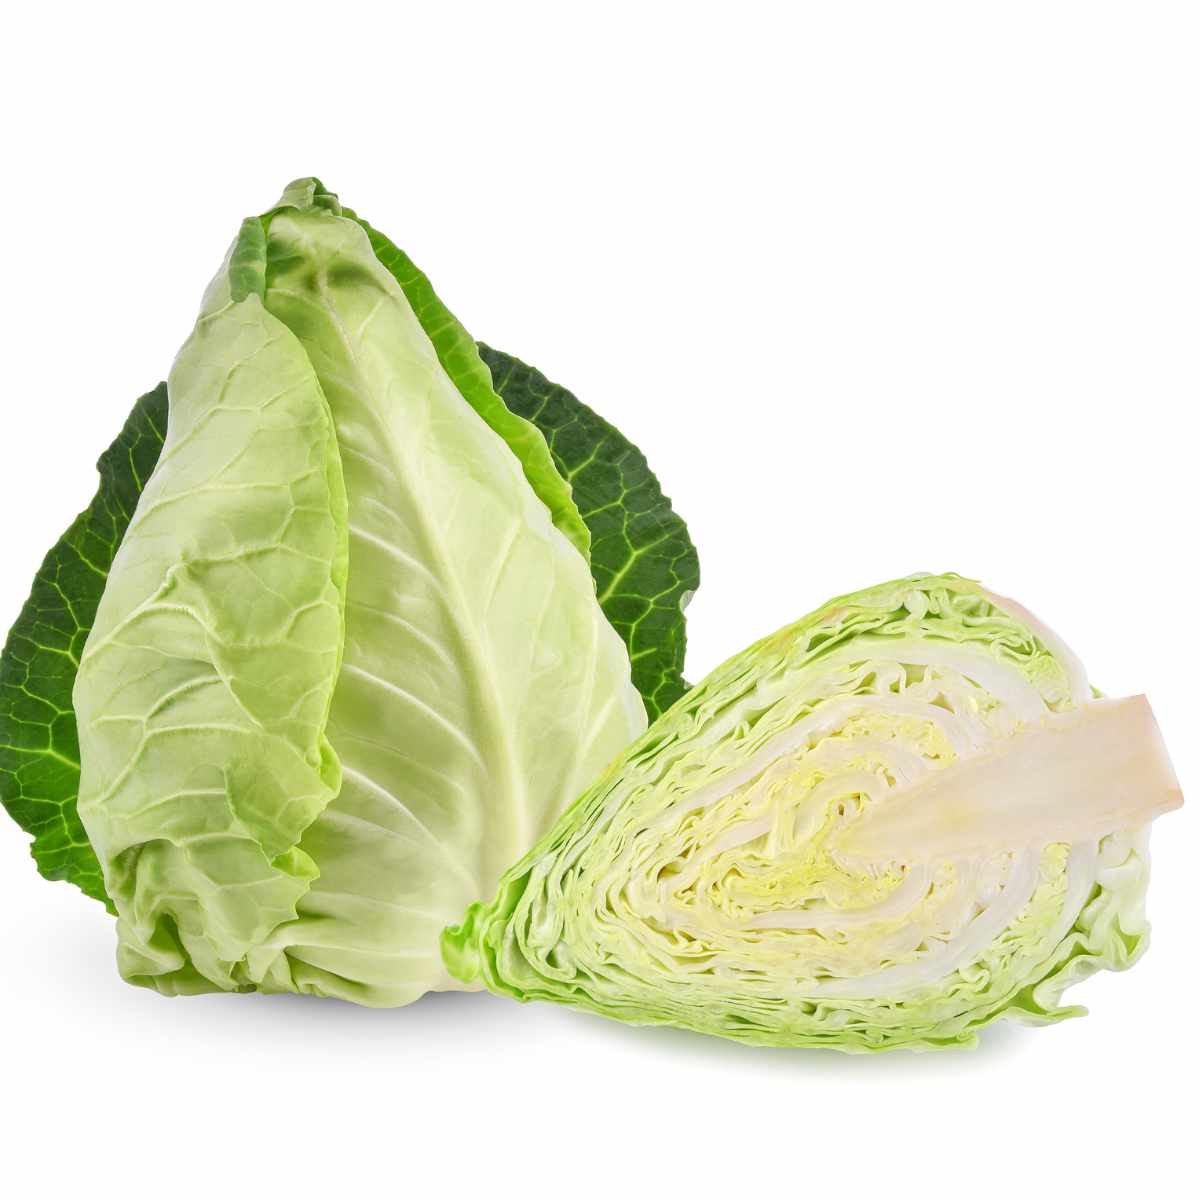 Pointed cabbage on a white background and sliced open.